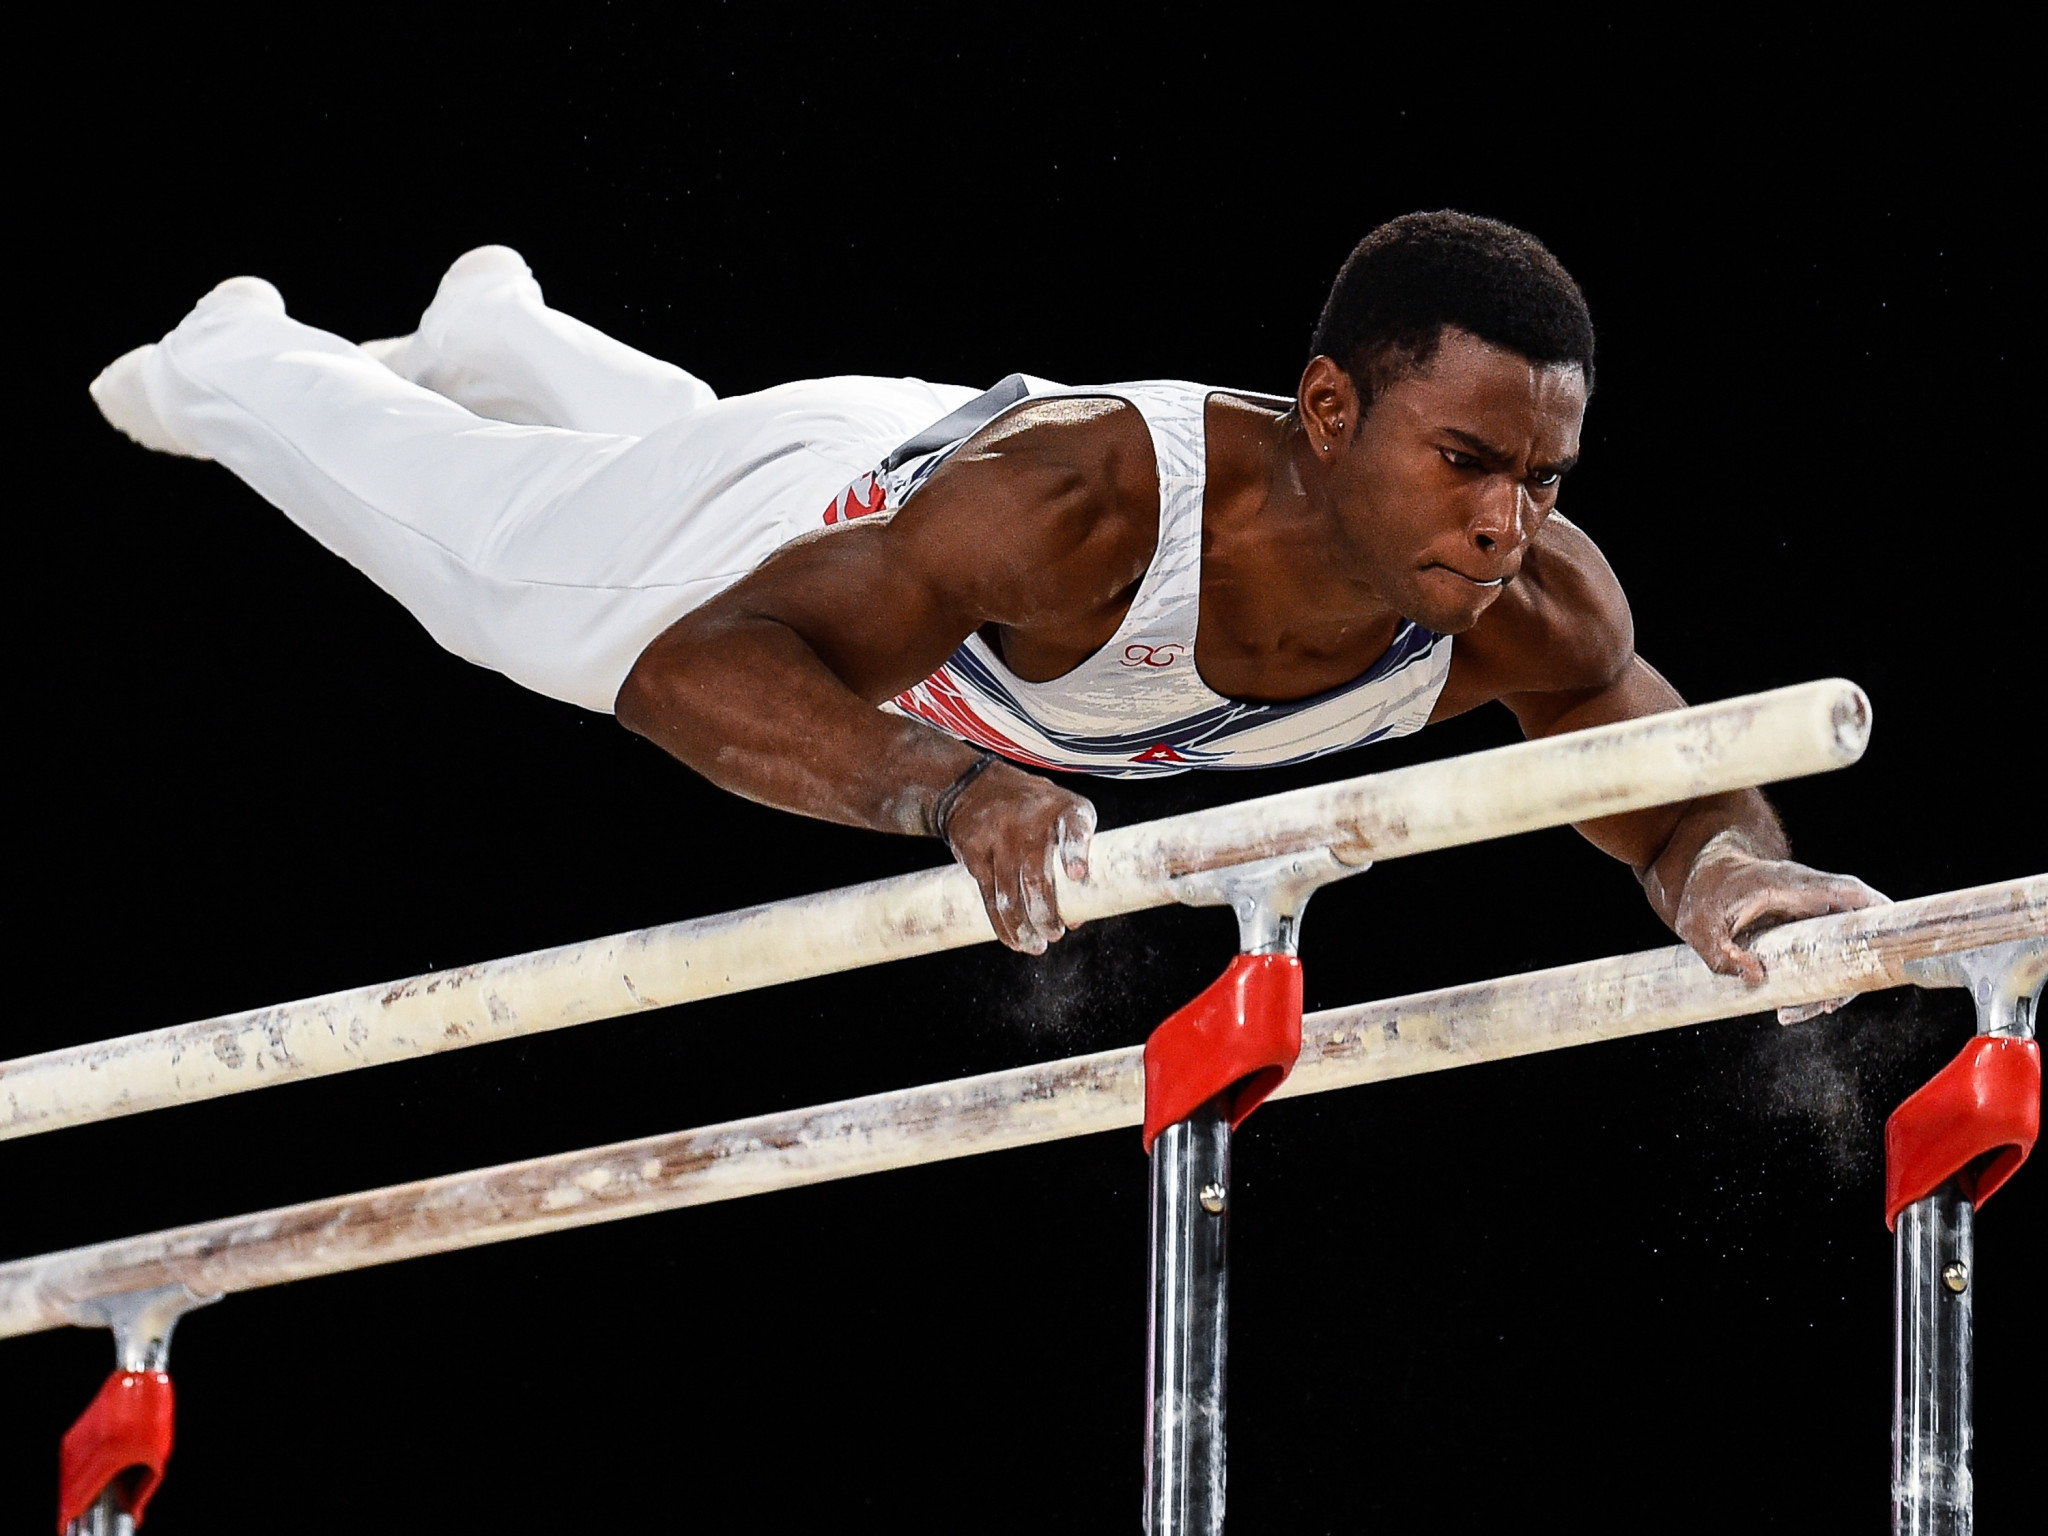 Double world medallist Manrique Larduet of Cuba continued his good form at the FIG World Challenge Cup in Portuguese city Guimarães today ©Getty Images